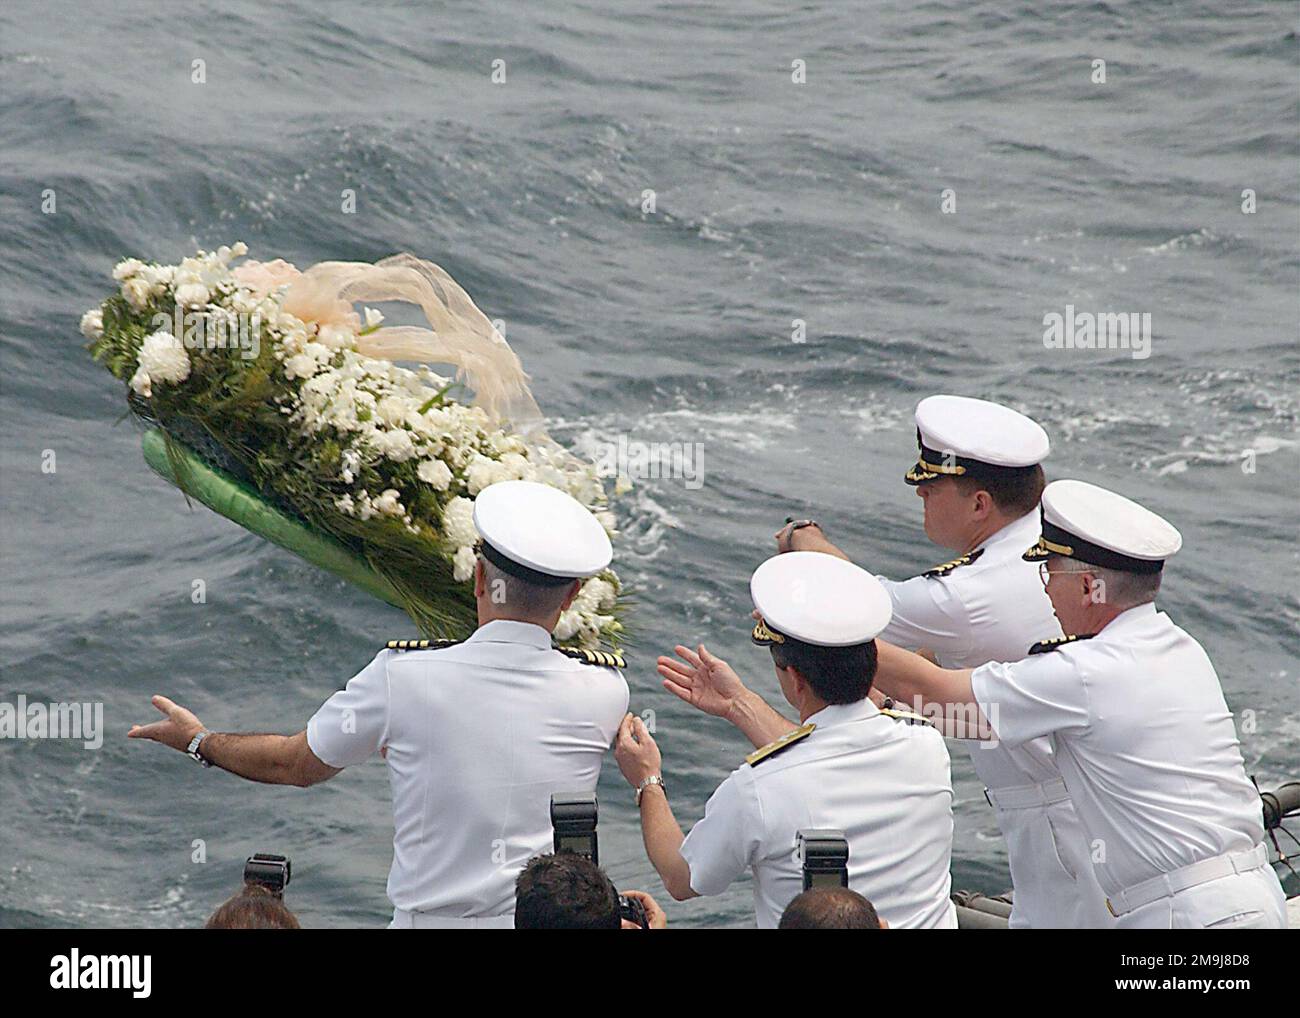 020911-N-2329T-001. [Complete] Scene Caption: US Navy (USN) members of the USN Nimitz Class Aircraft Carrier USS GEORGE WASHINGTON (CVN 73) crew and air wing toss a wreath into the sea during a memorial ceremony commemorating the one-year anniversary of the 9/11 terrorist attacks. Tossing the wreath are USN Captain (CAPT) Martin J. Erdossy (left), Commanding Officer; USN Rear Admiral (RADM) (Upper half) Joseph A. Sestak Jr., GW Battle Group Commander; USN CAPT Dana R. Potts, Carrier Air Wing (CAW) 17 Commander; and USN CAPT Gerald D. Roncolato (right), Commander of Destroyer Squadron 26. A yea Stock Photo